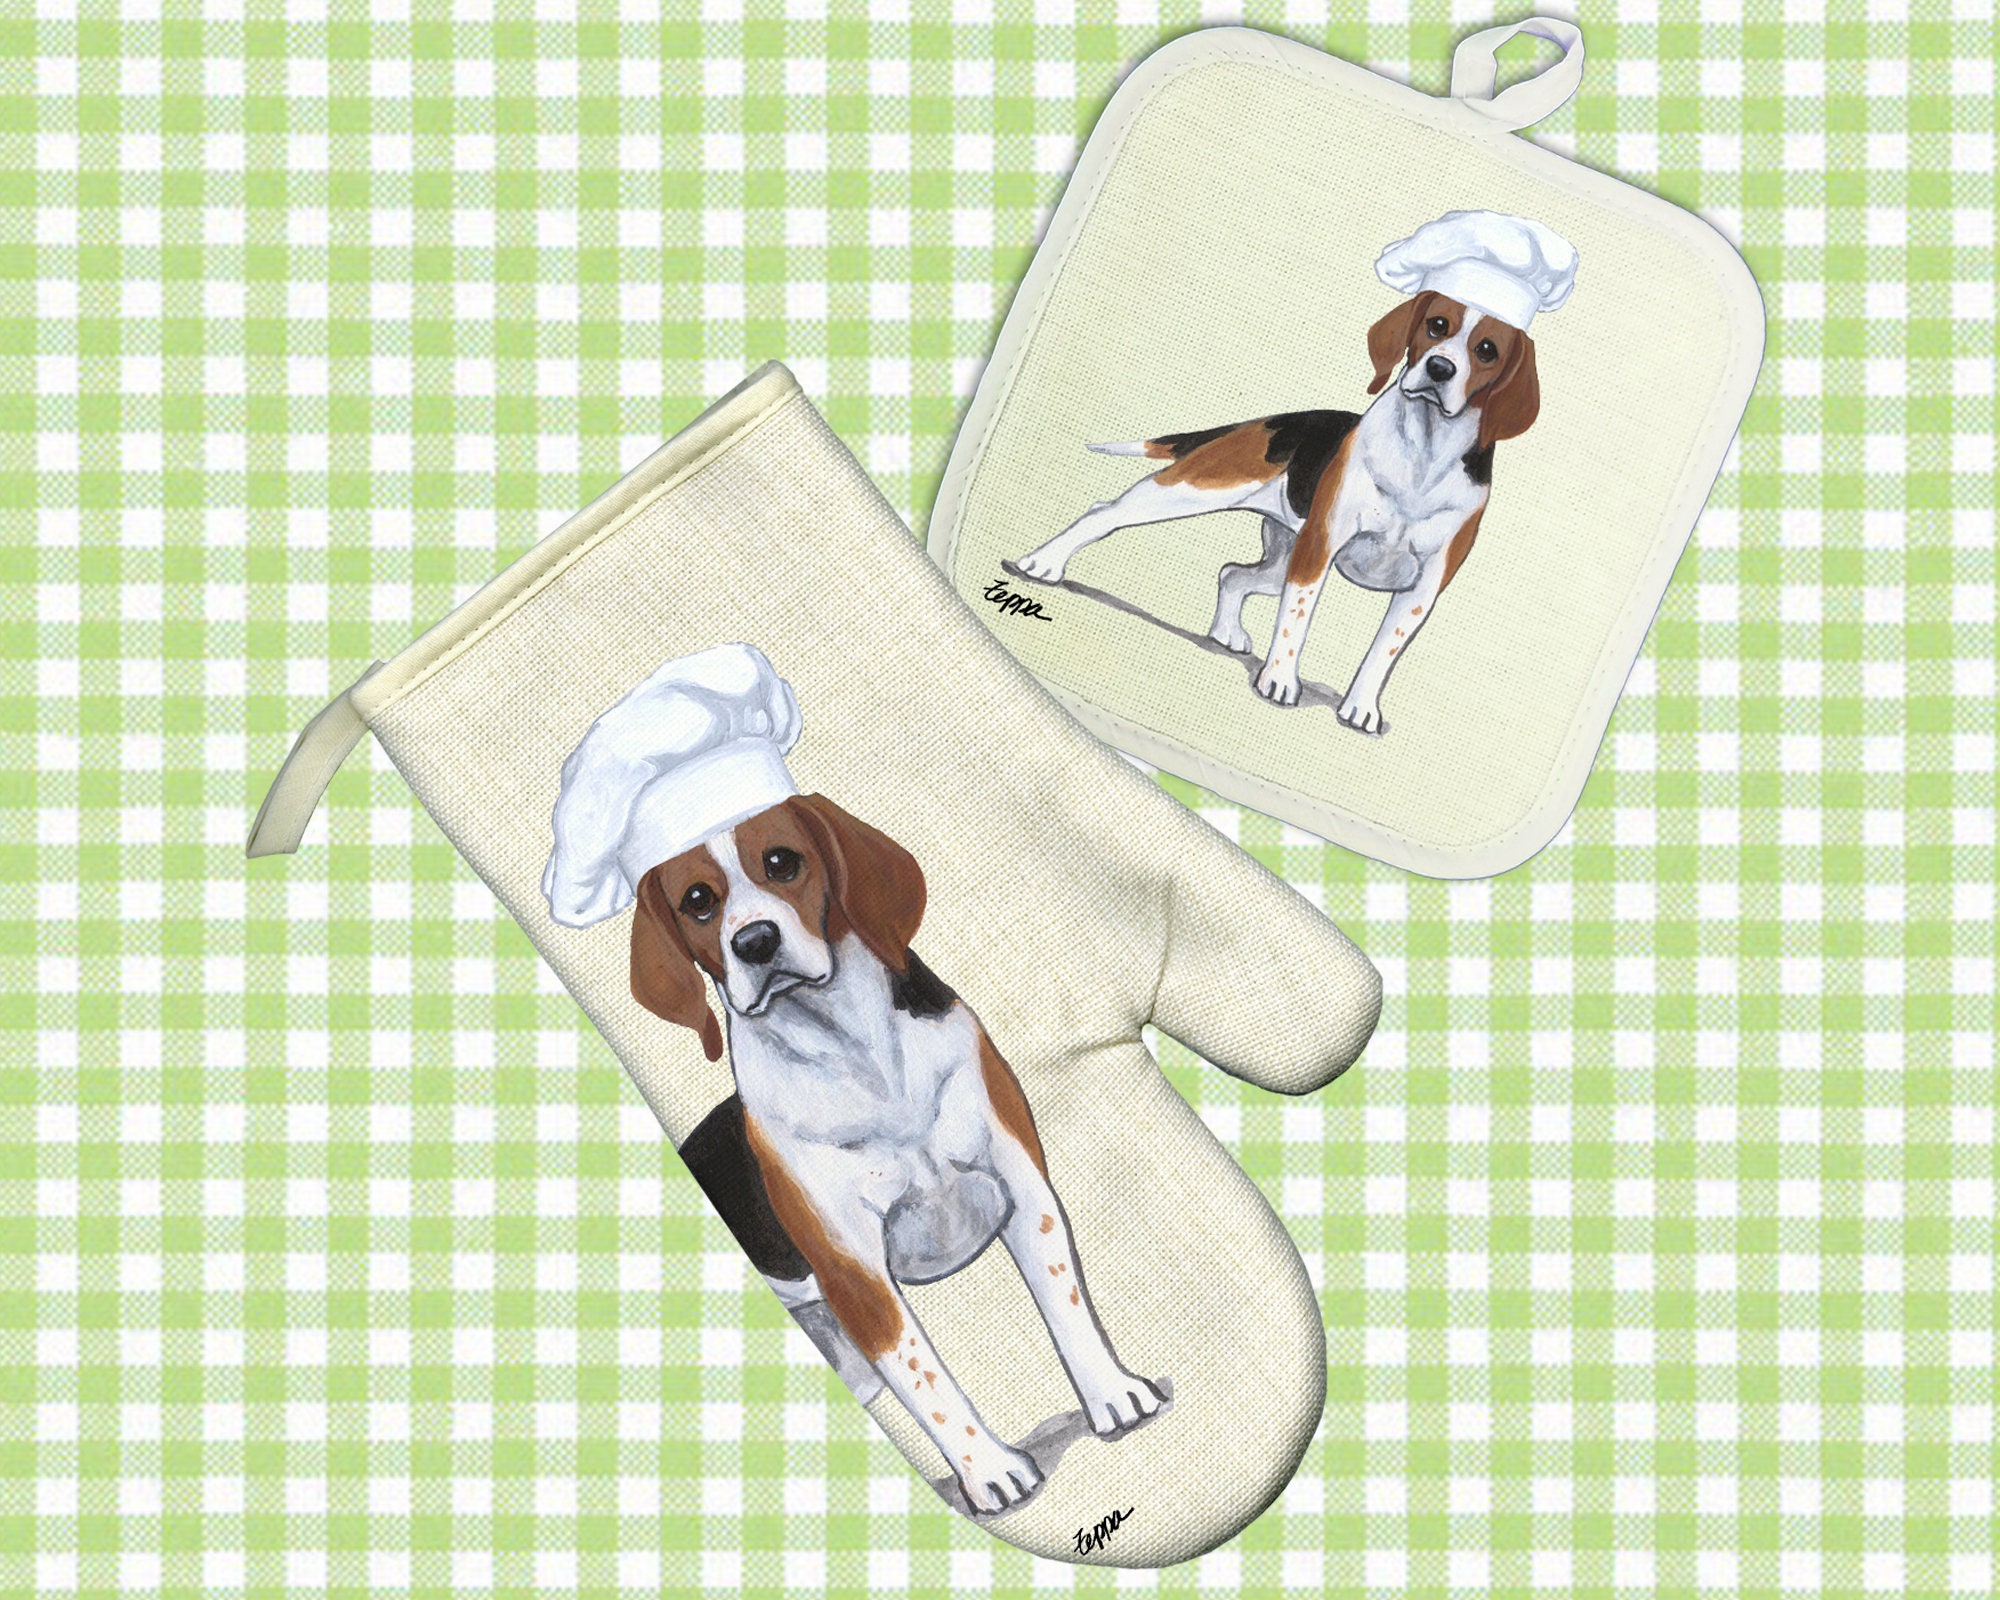 Oven Gloves Cute Yoga Fox Oven Mitts Kitchen Gloves Oven Mitt Potholders  Kitchen Textile Gift for Foodie Hot Stove Hot Pad Cookware ZZ8471 